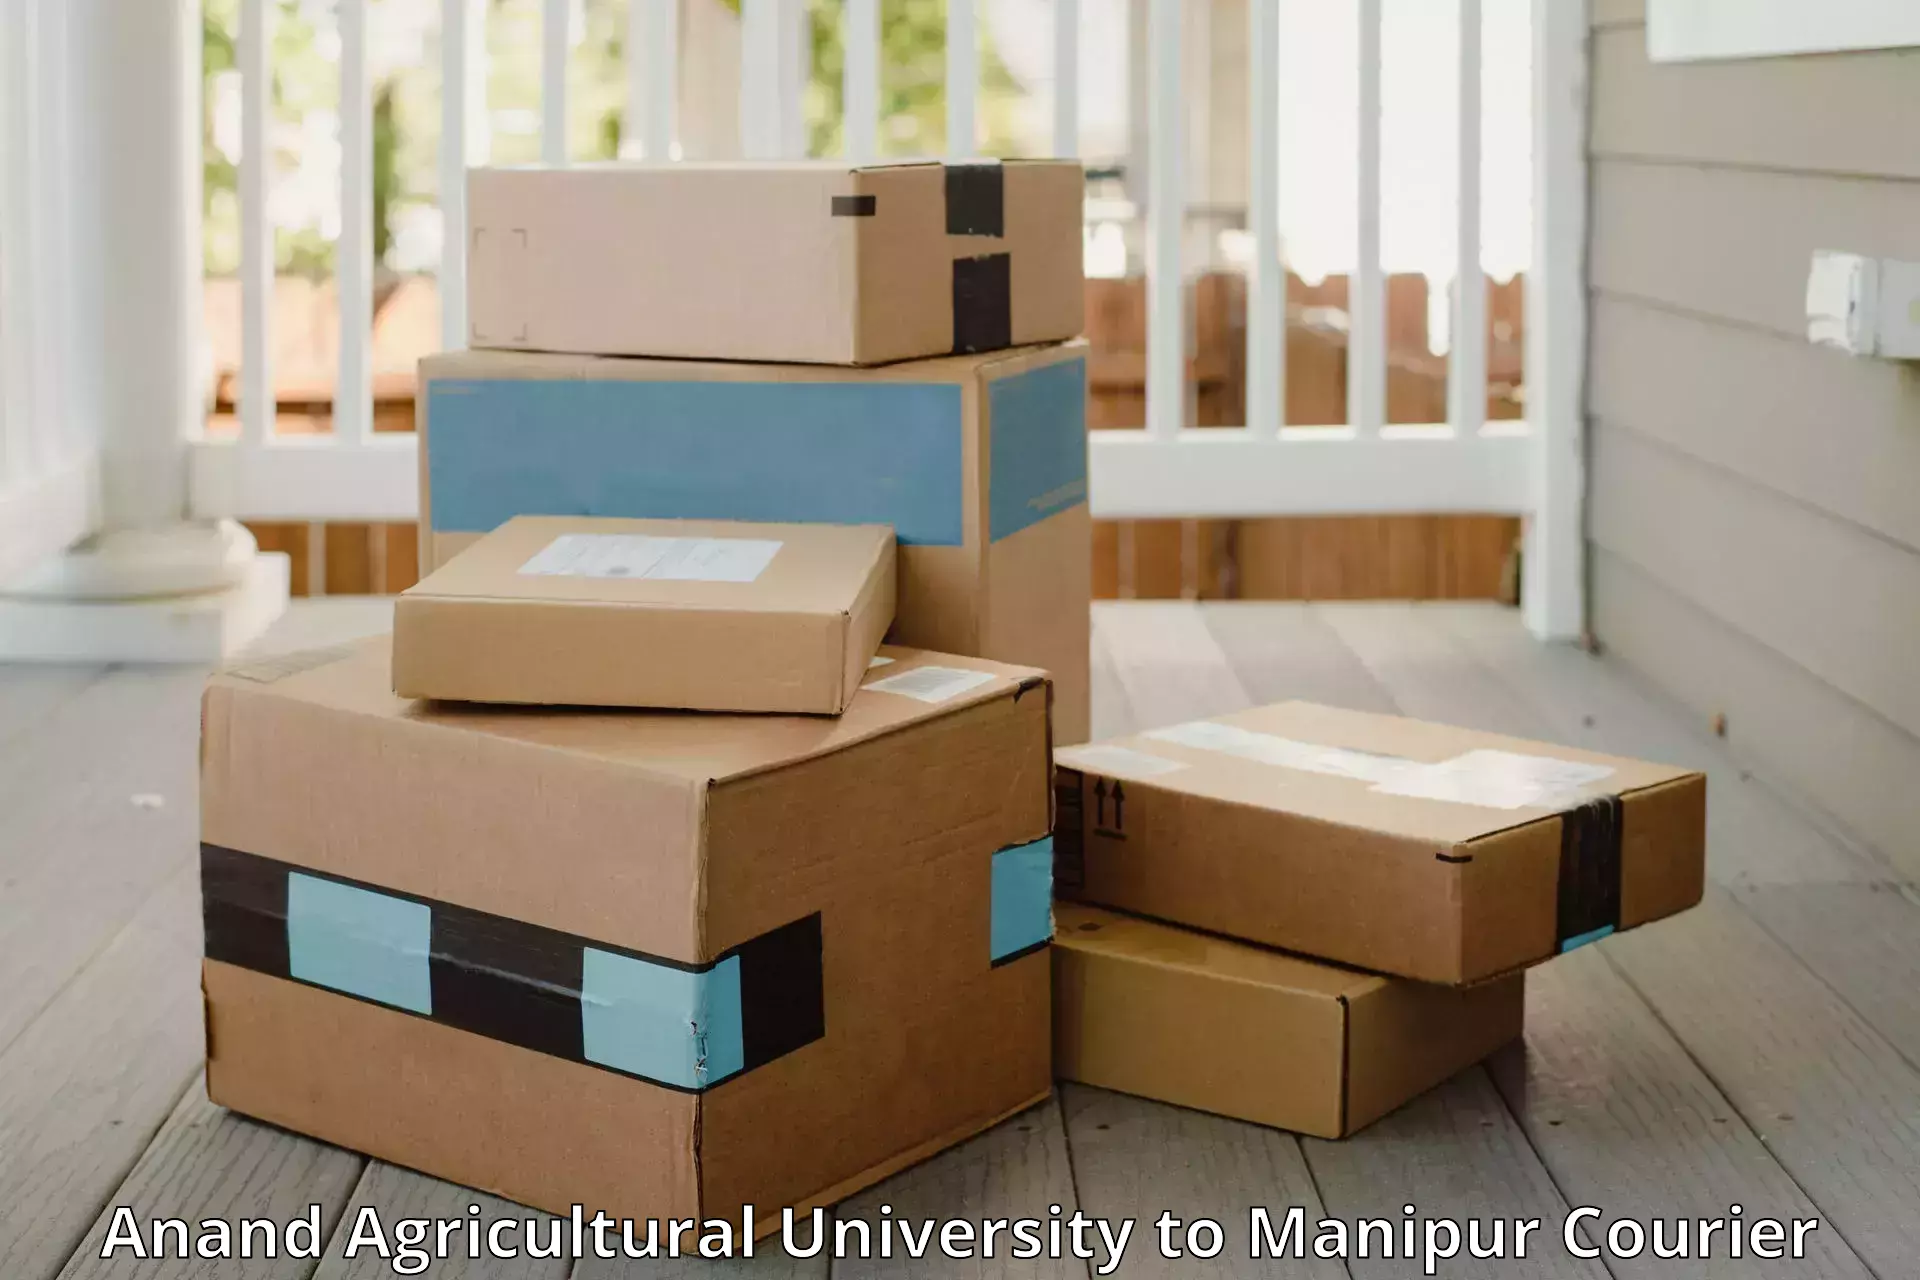 Baggage transport cost Anand Agricultural University to Manipur